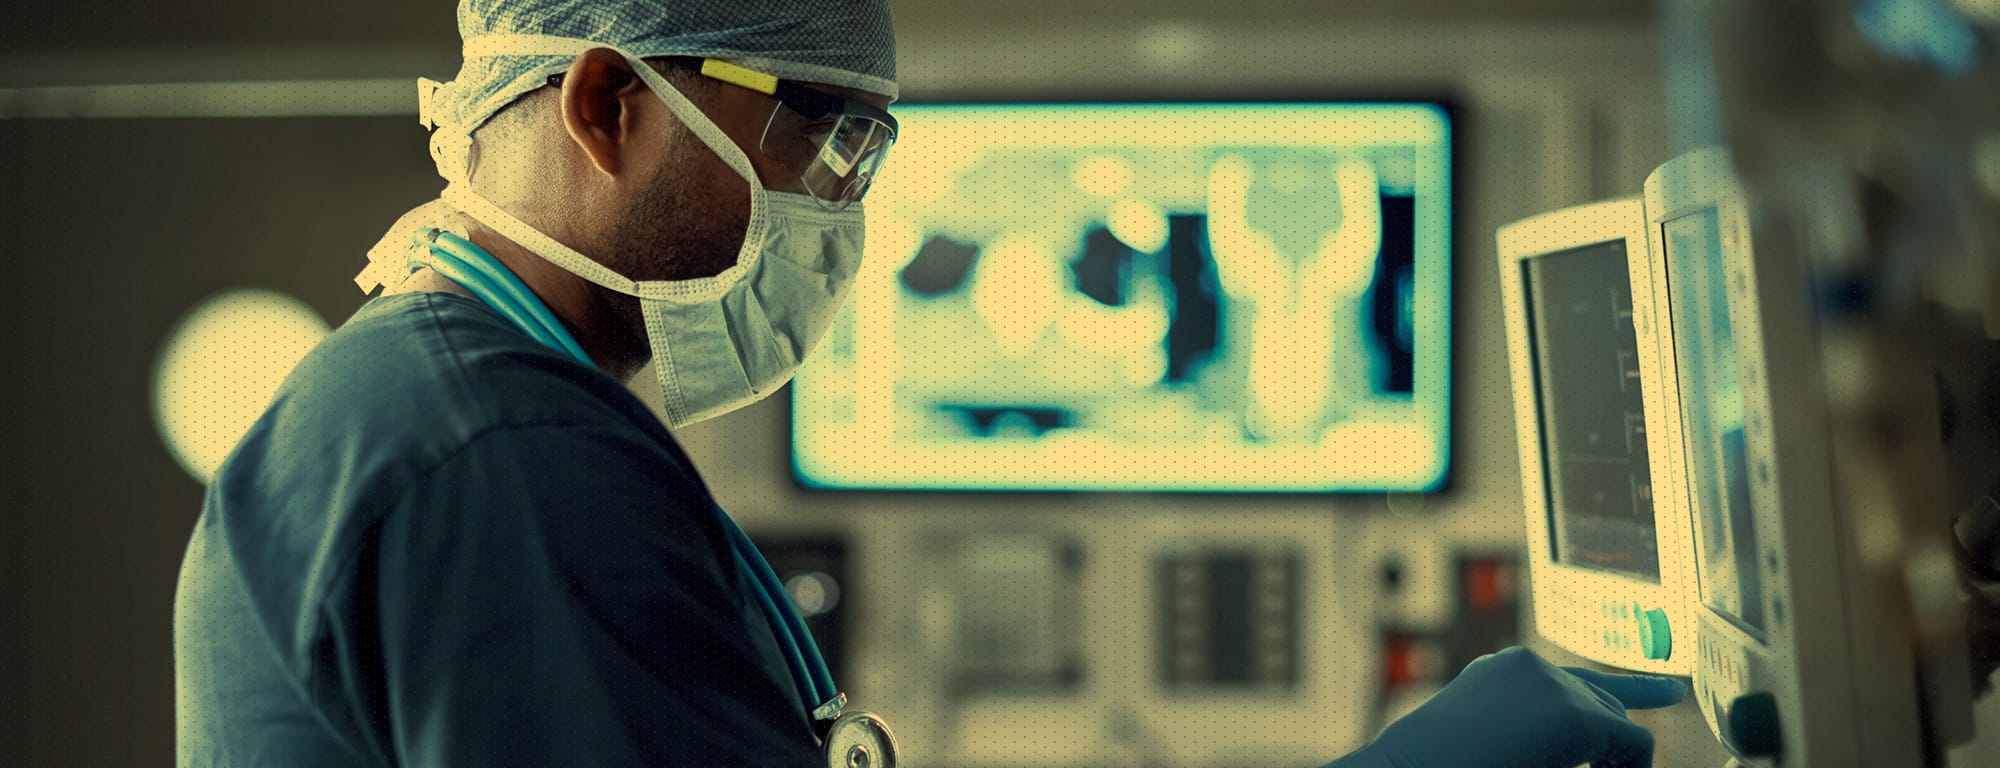 Medical doctor in operating room intently focuses on a computer screen